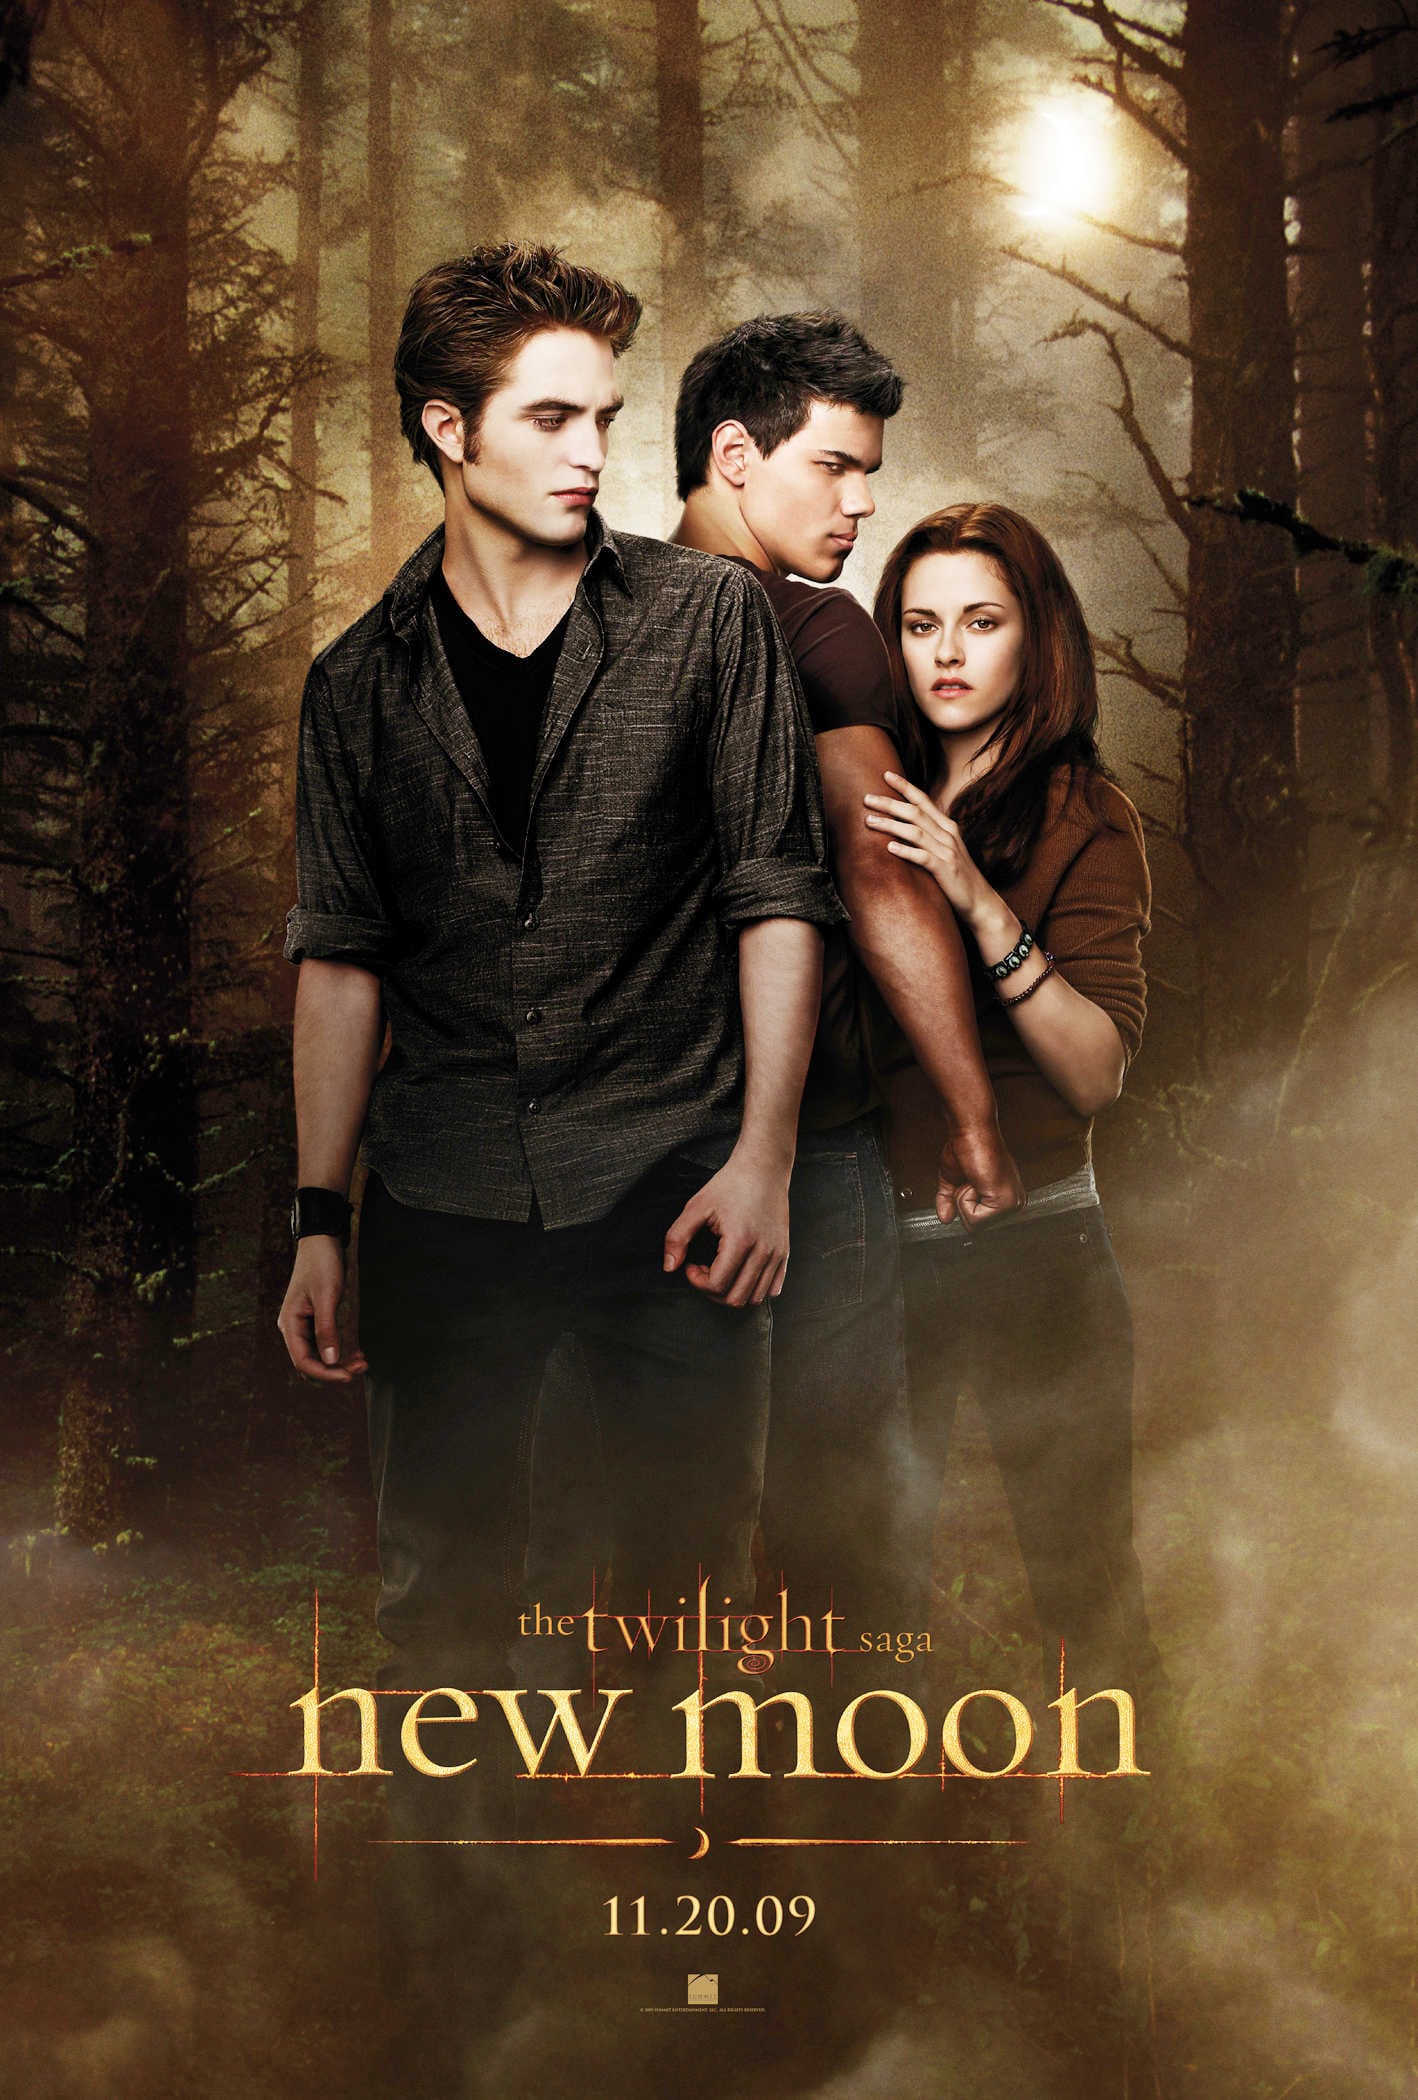 What Is The Theme Of Twilight New Moon